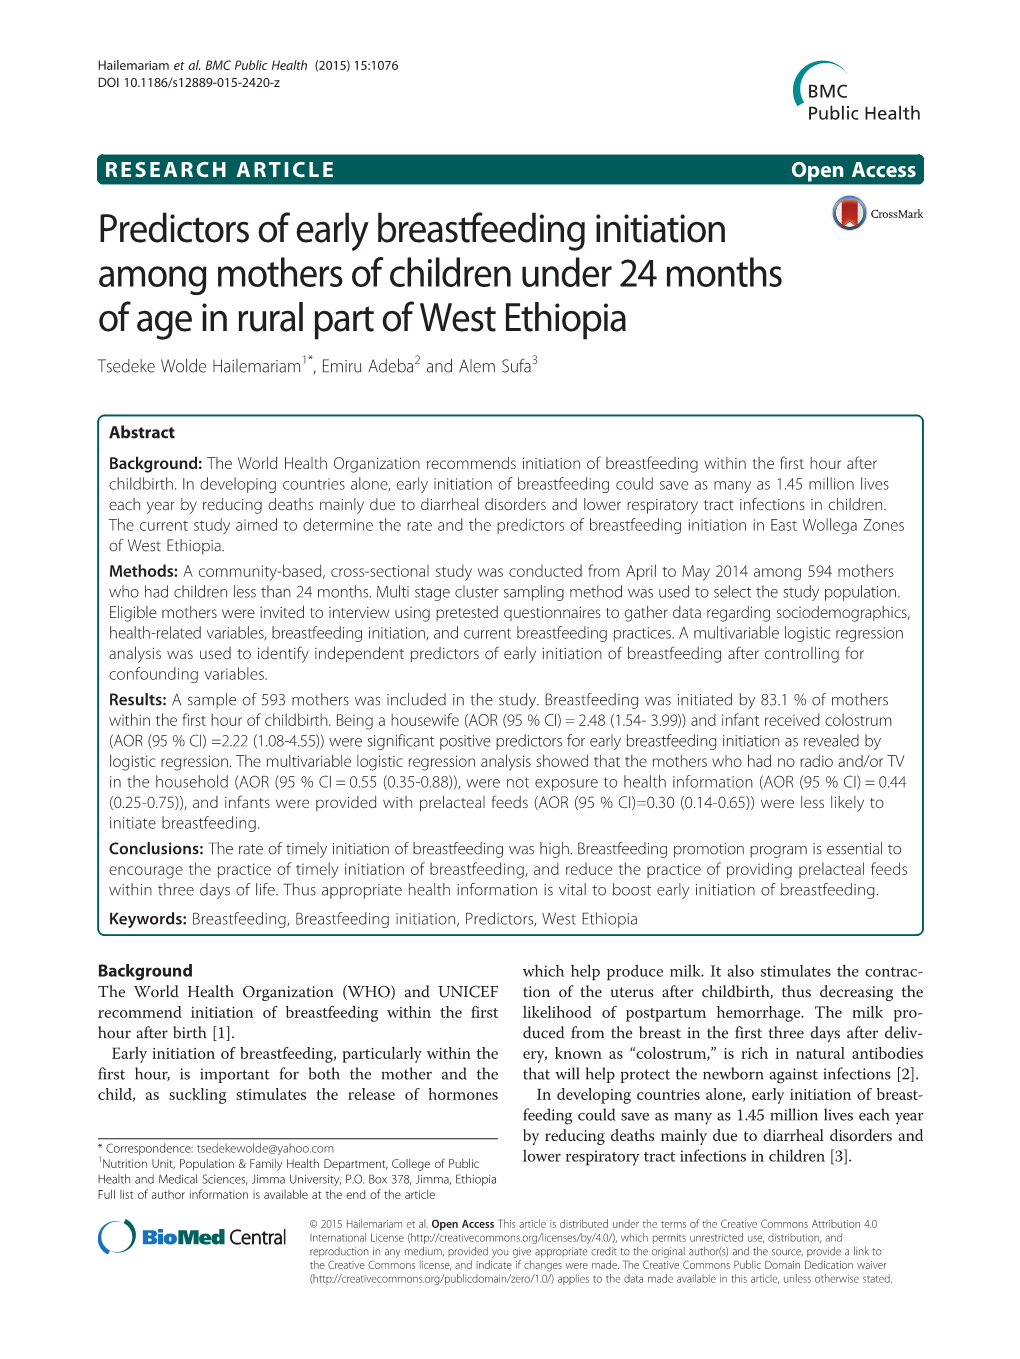 Predictors of Early Breastfeeding Initiation Among Mothers of Children